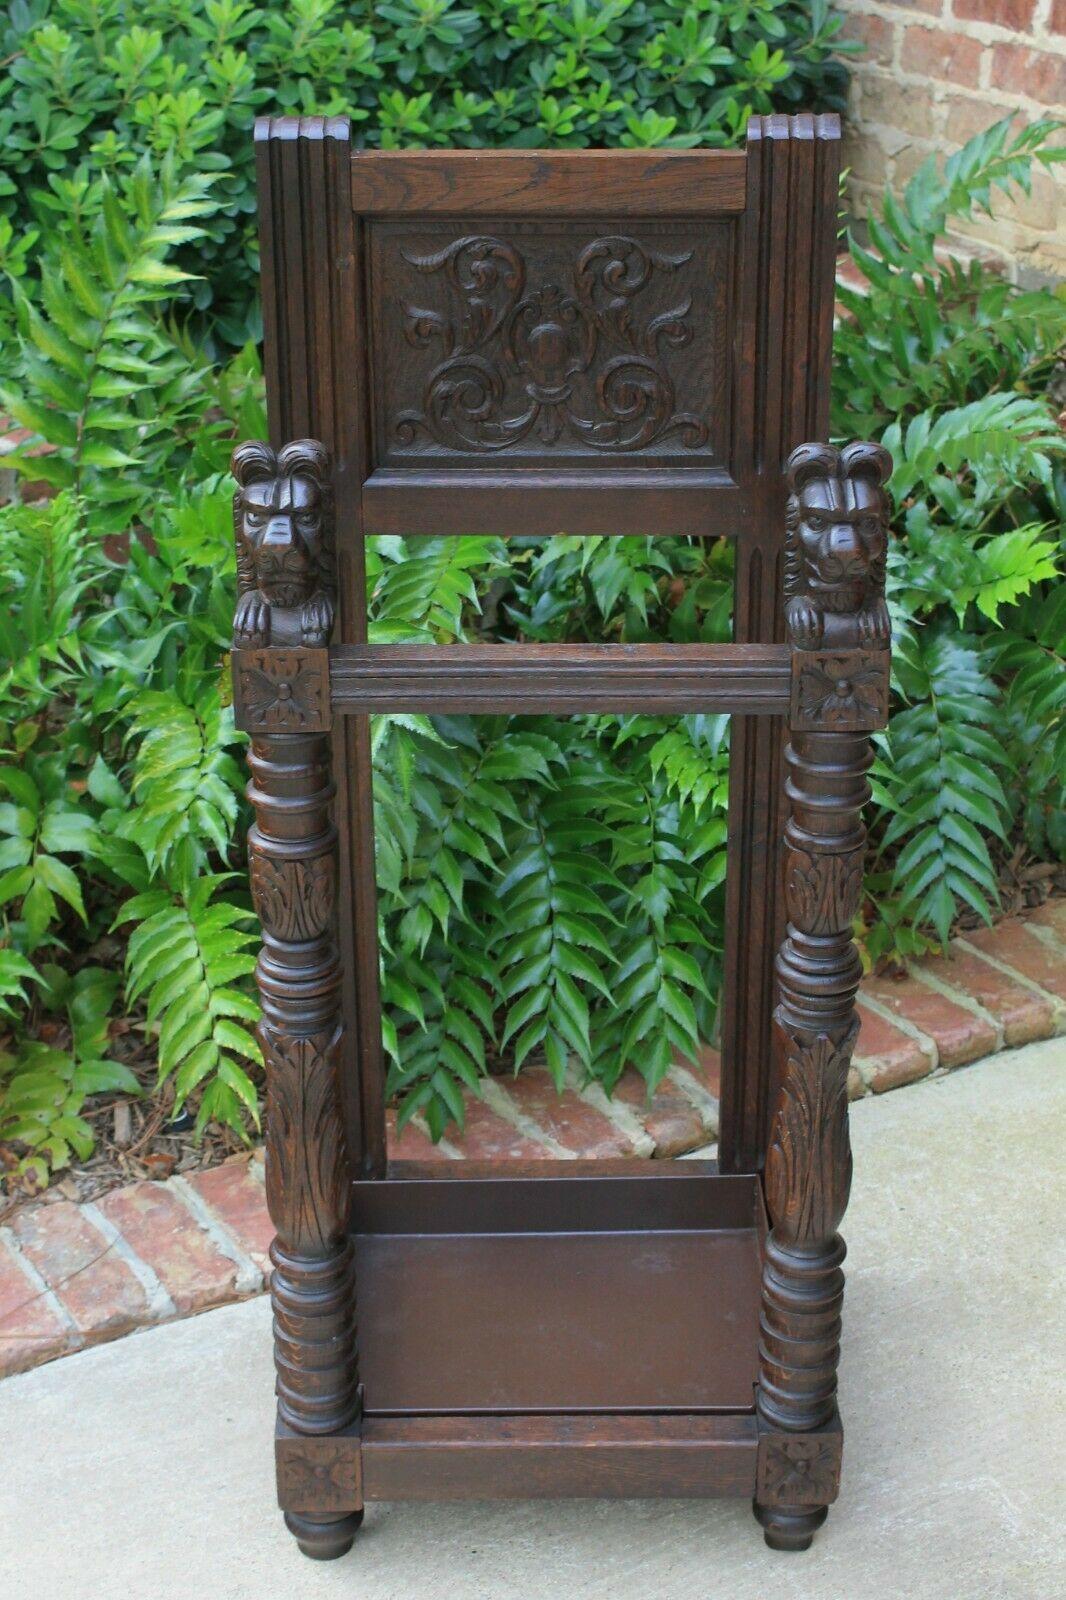 Gothic Revival Antique English Oak Gothic Umbrella Cane Stick Stand Hall Tree Entry Foyer Stand